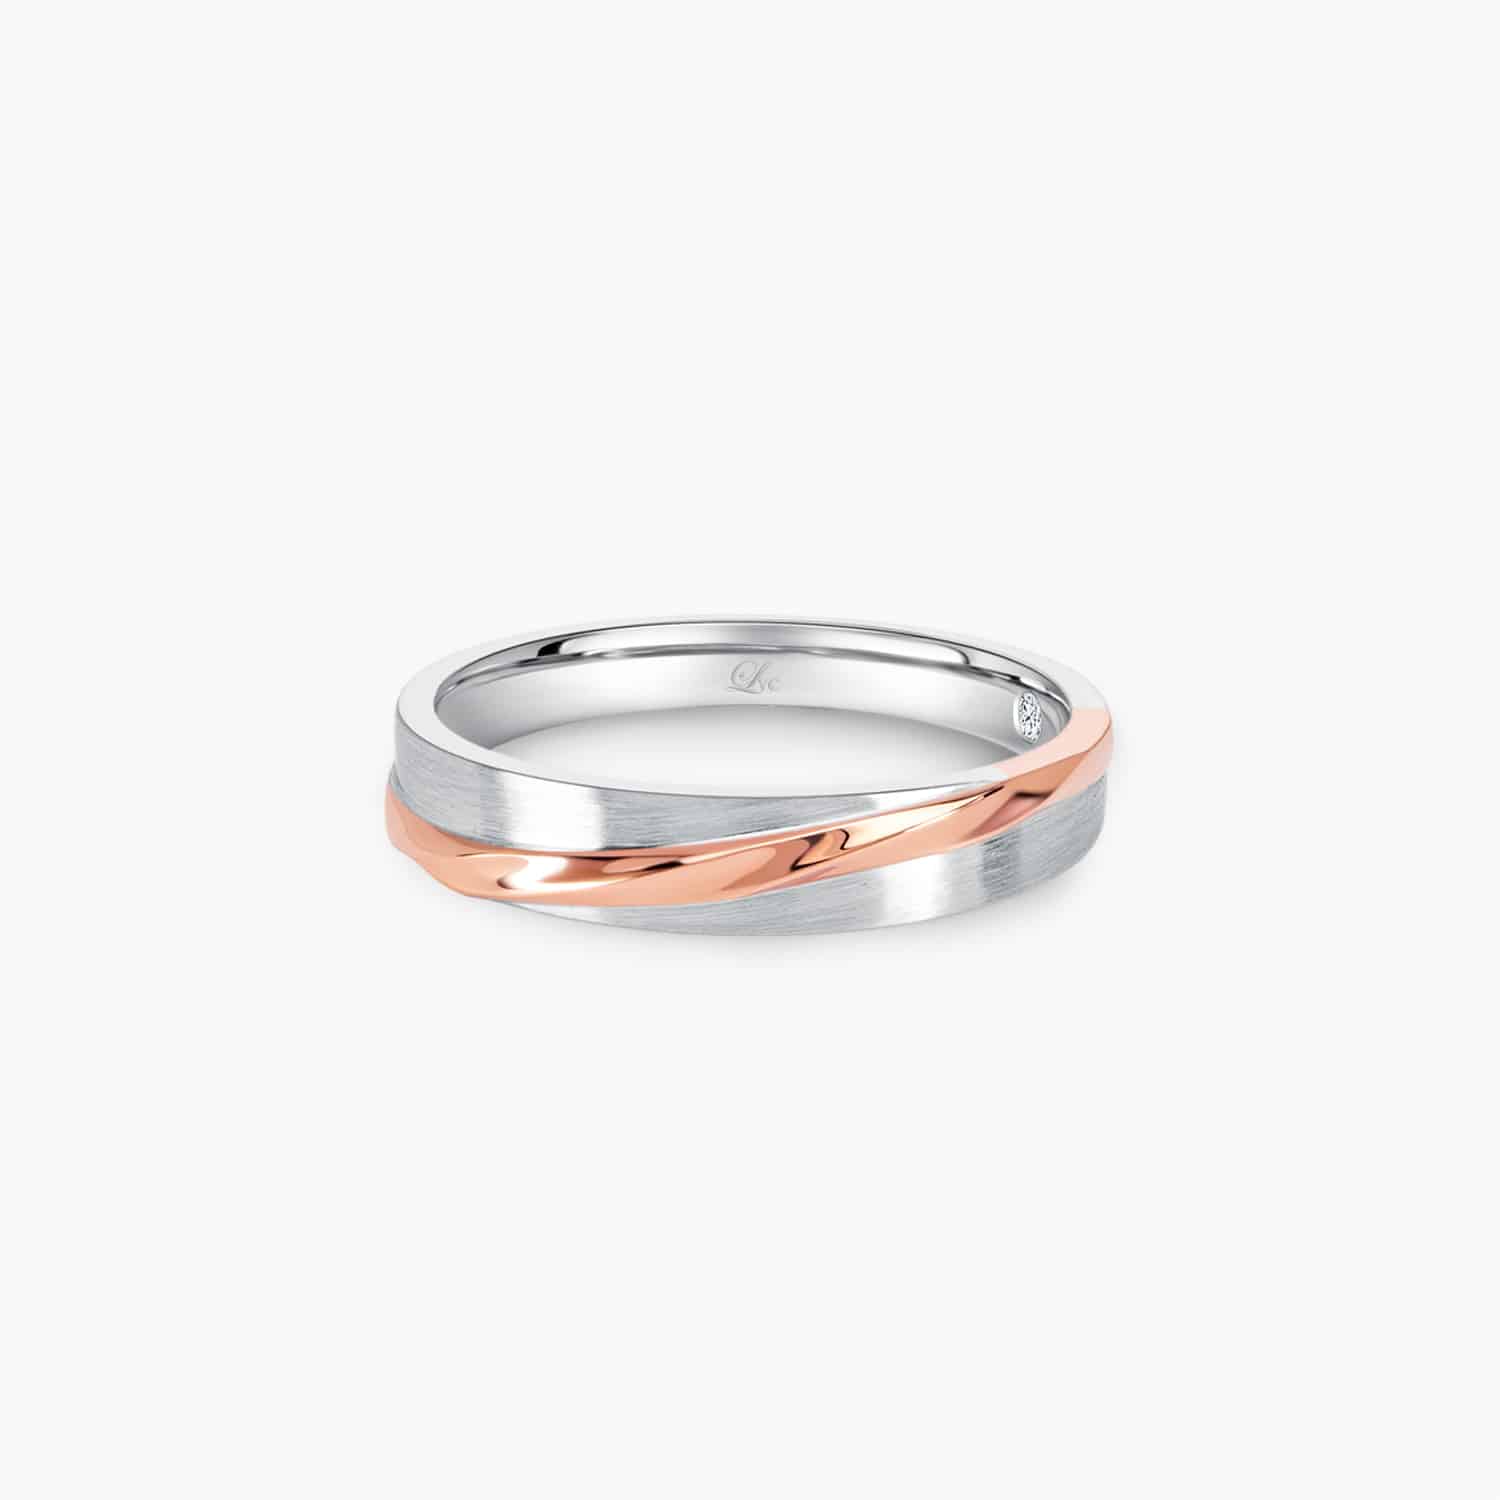 LVC DESIRIO ALLURE WEDDING BAND IN WHITE AND ROSE GOLD WITH A GLOSSY FINISH a wedding band for men in white and rose gold with glossy finish